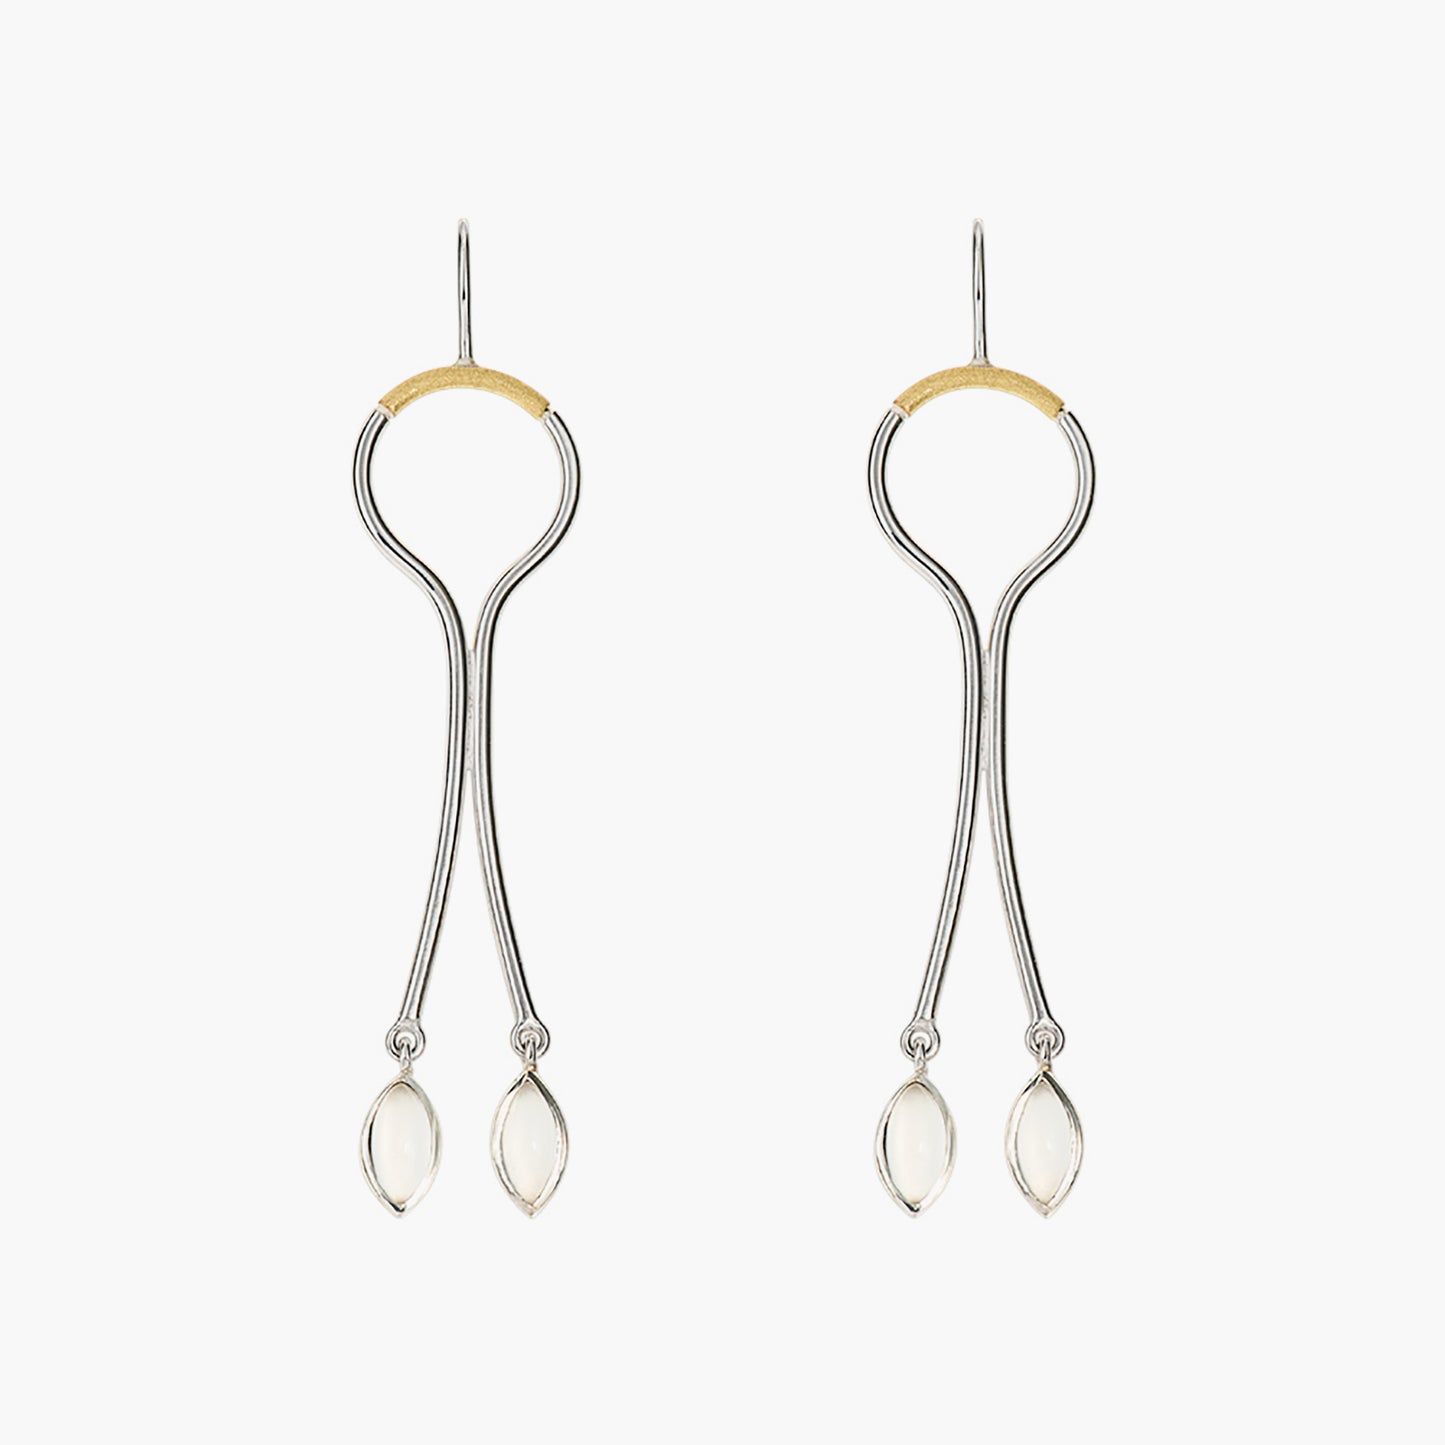 Sterling silver hanging earrings with curving wire design, accented with gold and featuring moonstone drops.